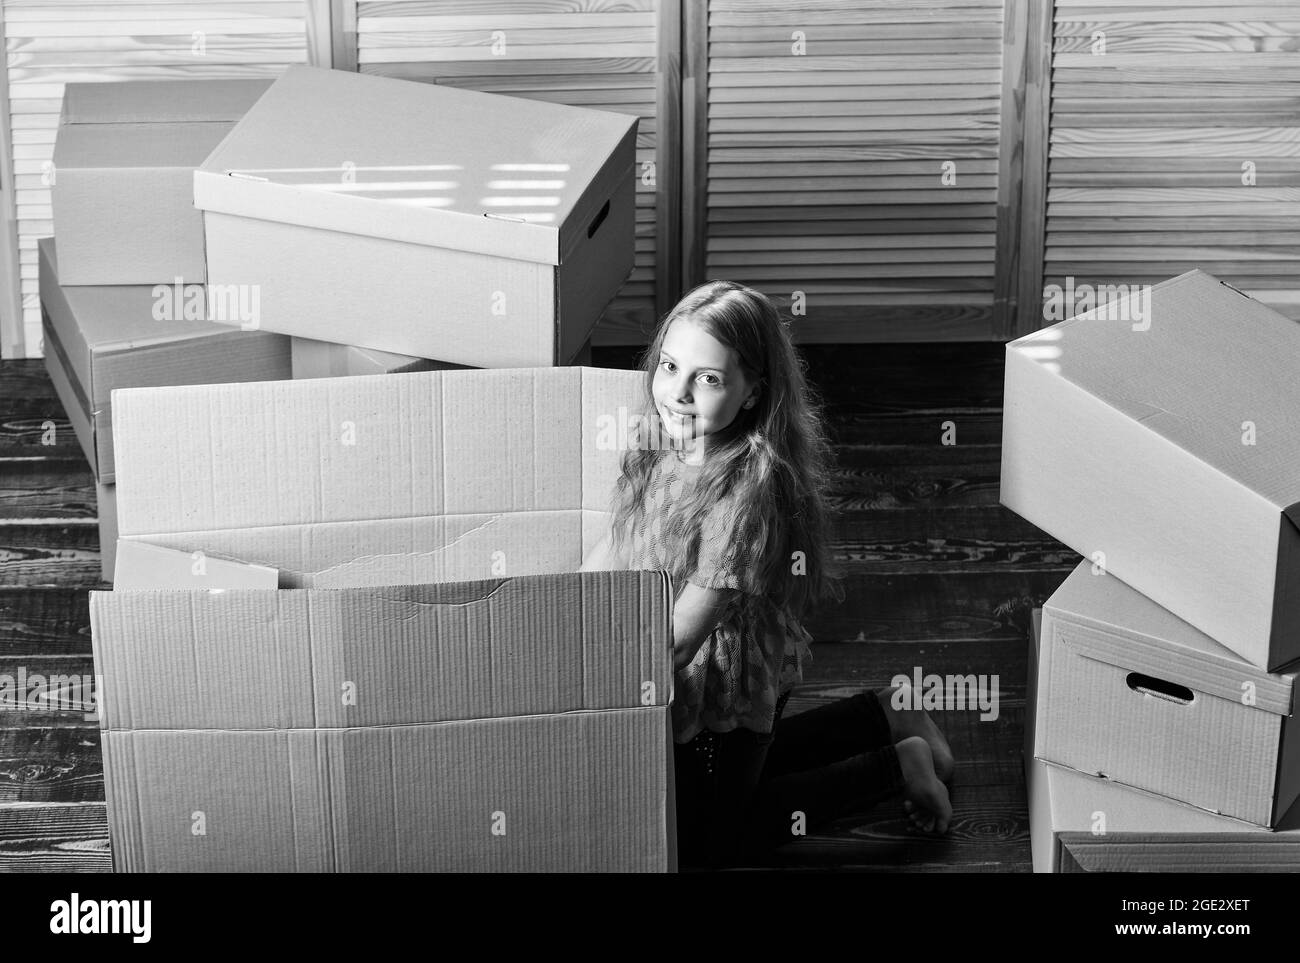 https://c8.alamy.com/comp/2GE2XET/happy-child-box-repair-of-room-new-apartment-unpacking-moving-boxes-happy-little-girl-sit-in-room-on-boxes-cardboard-boxes-moving-to-a-new-2GE2XET.jpg